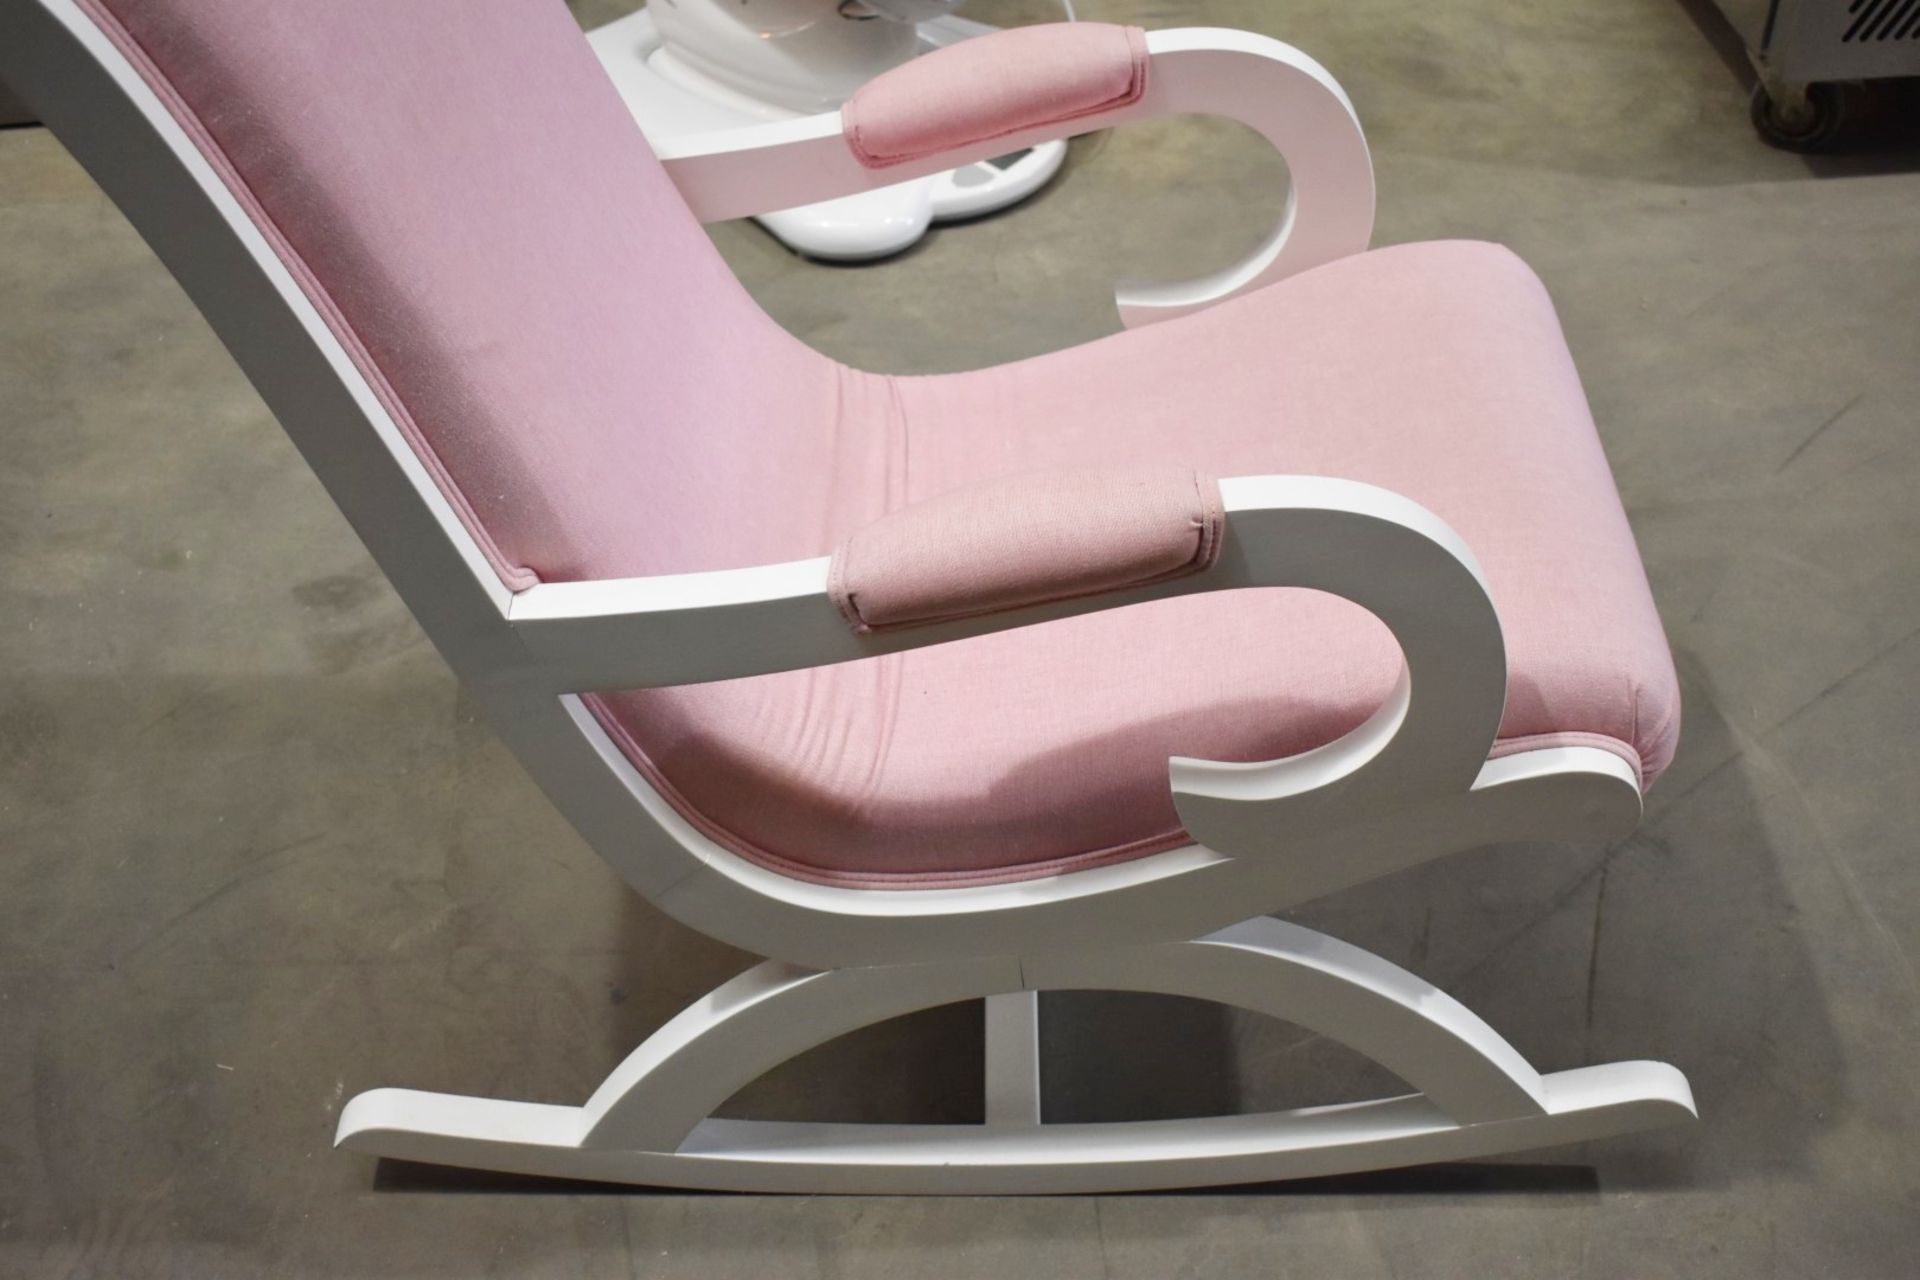 1 x Mother and Baby Rocking Chair With Footstool - Pink Upholstery and White Frame - Size W60 x D110 - Image 4 of 5